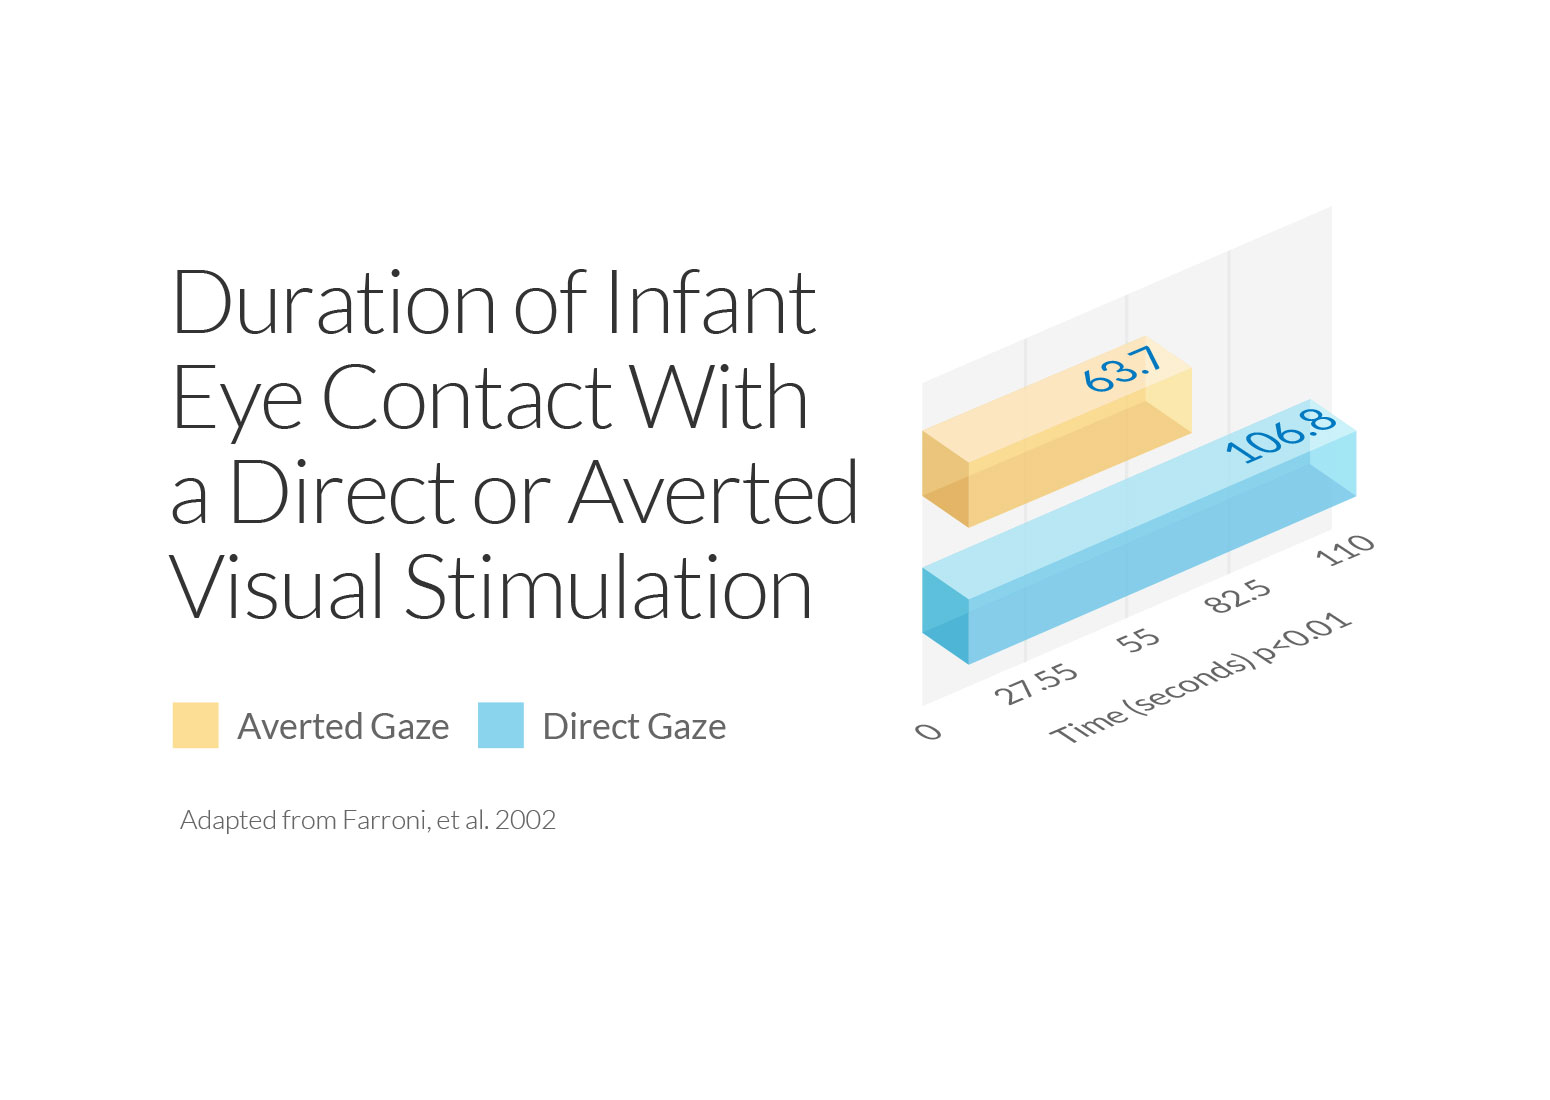 Duration of Infant Eye Contact